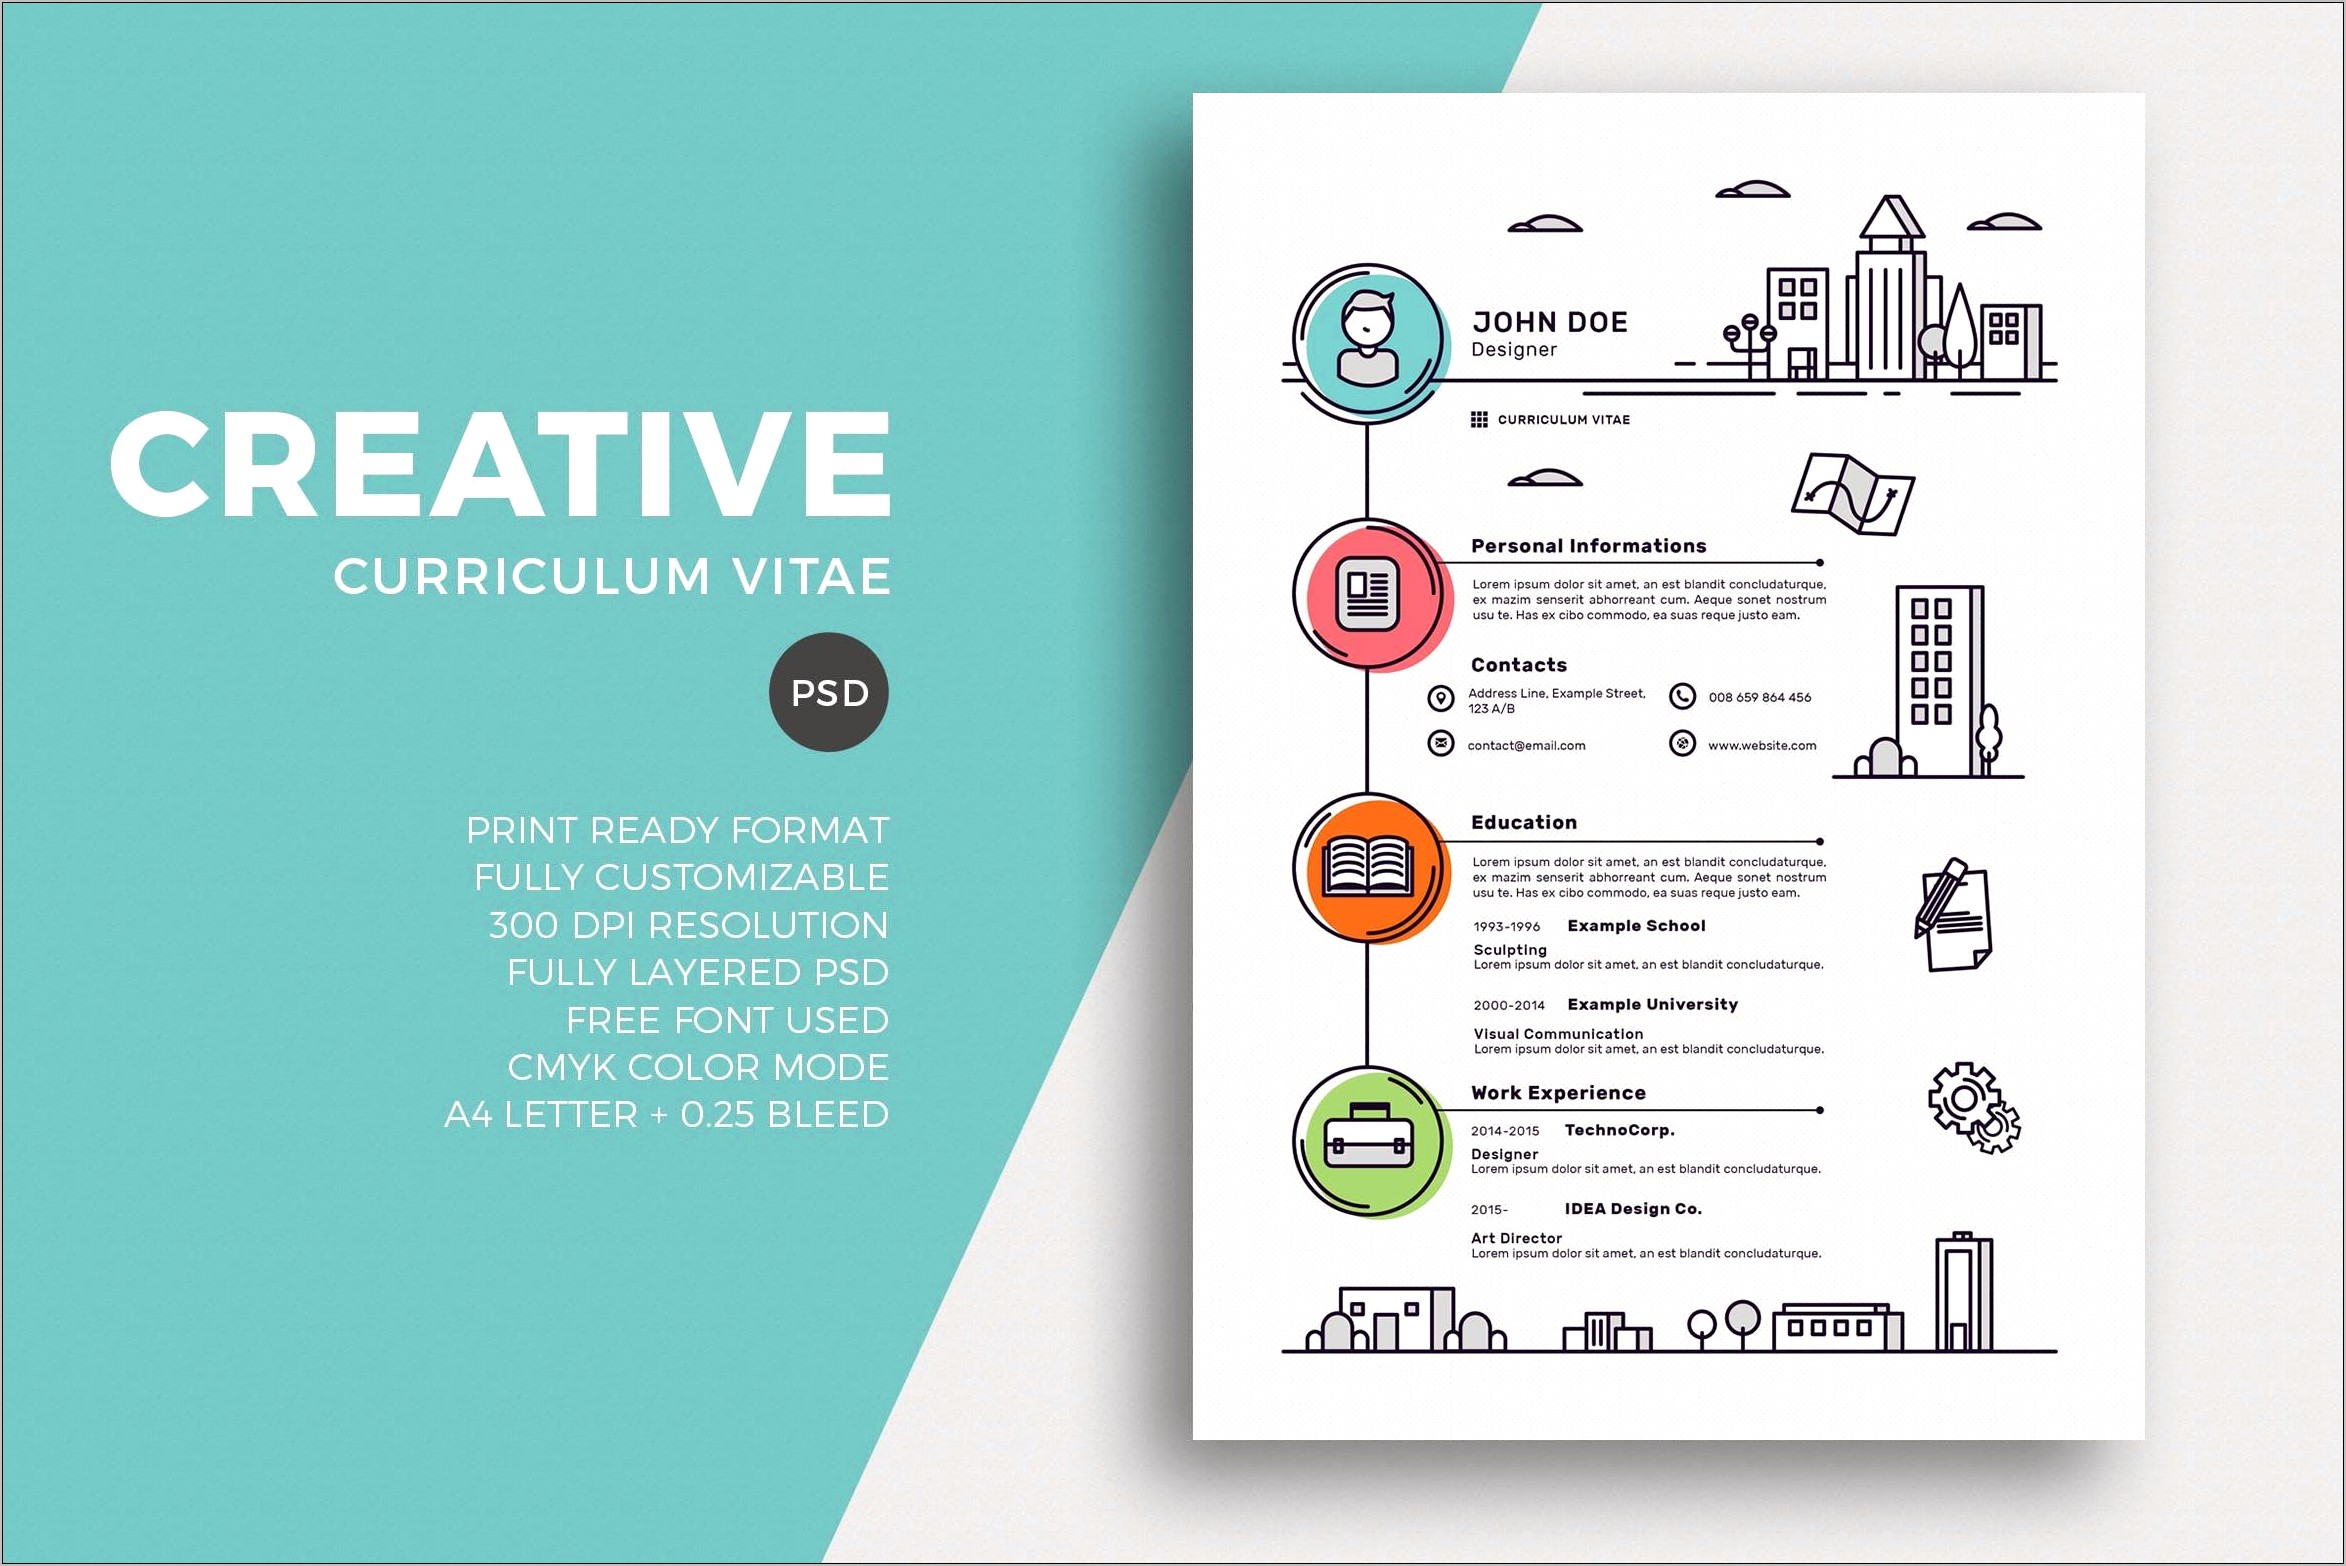 after effects resume templates free download